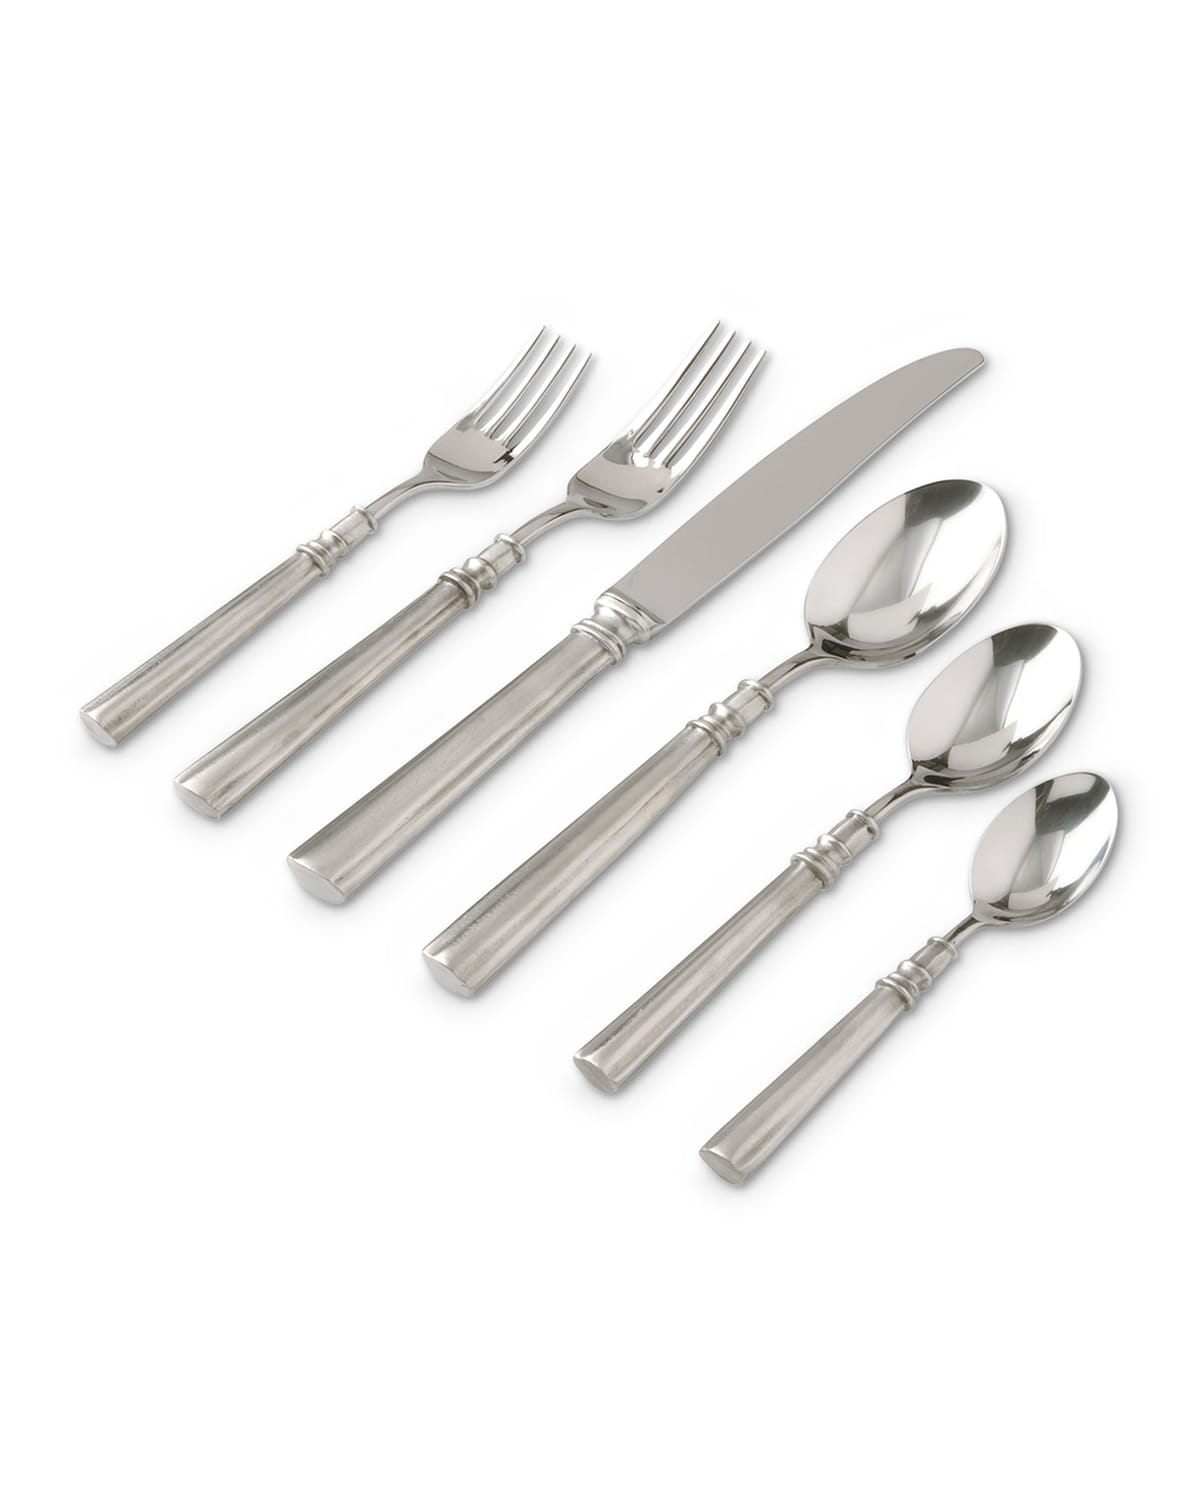 Match Lucia 6-piece Flatware Place Setting In Gray